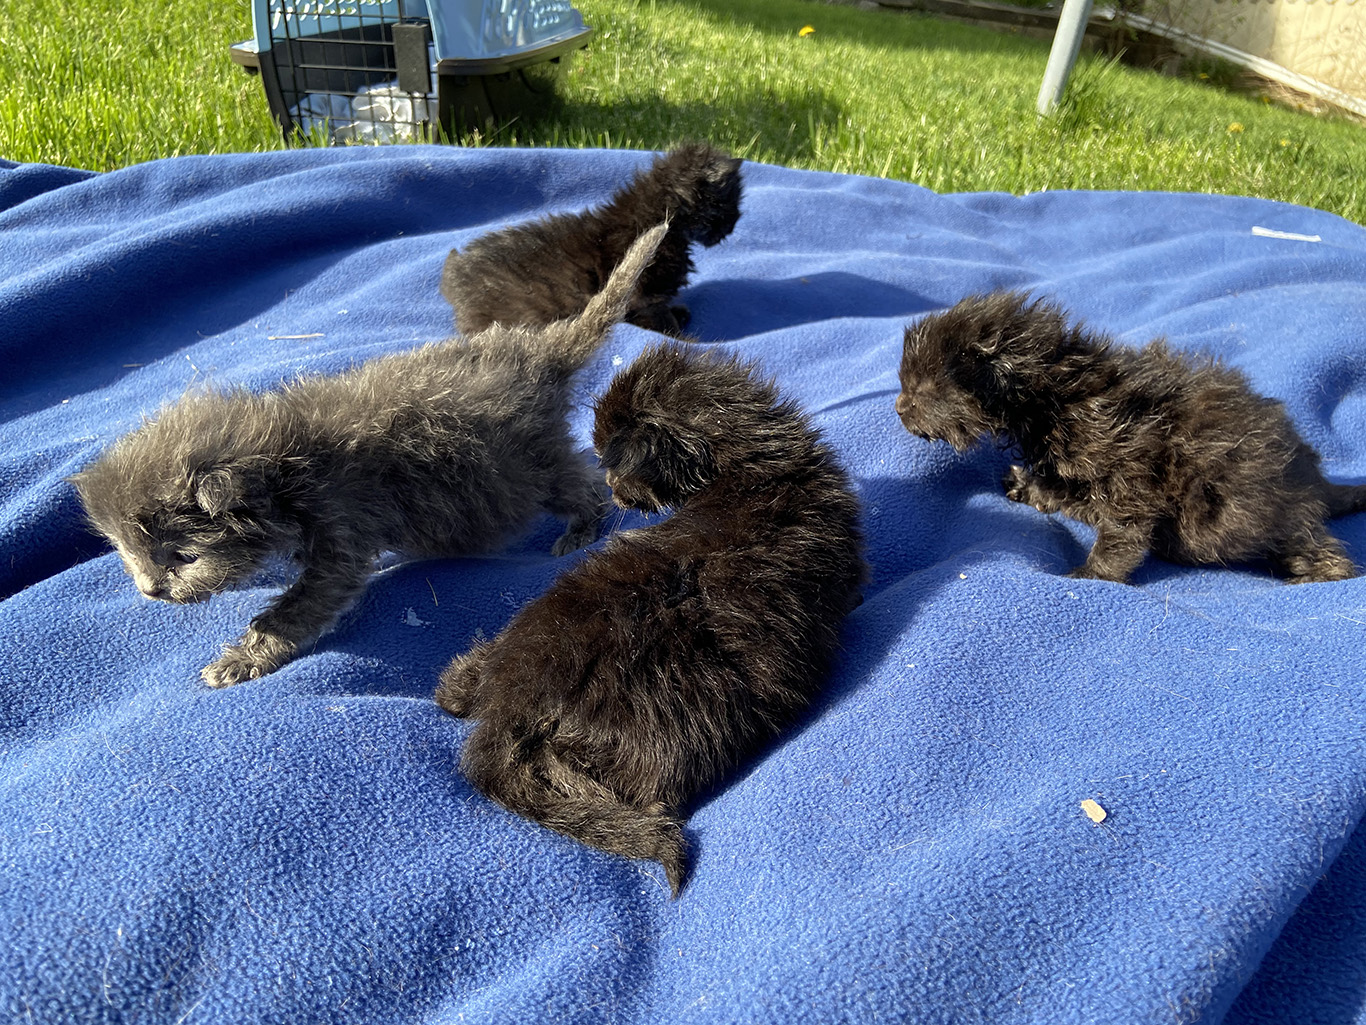 Four three-week-old kittens on a blanket.